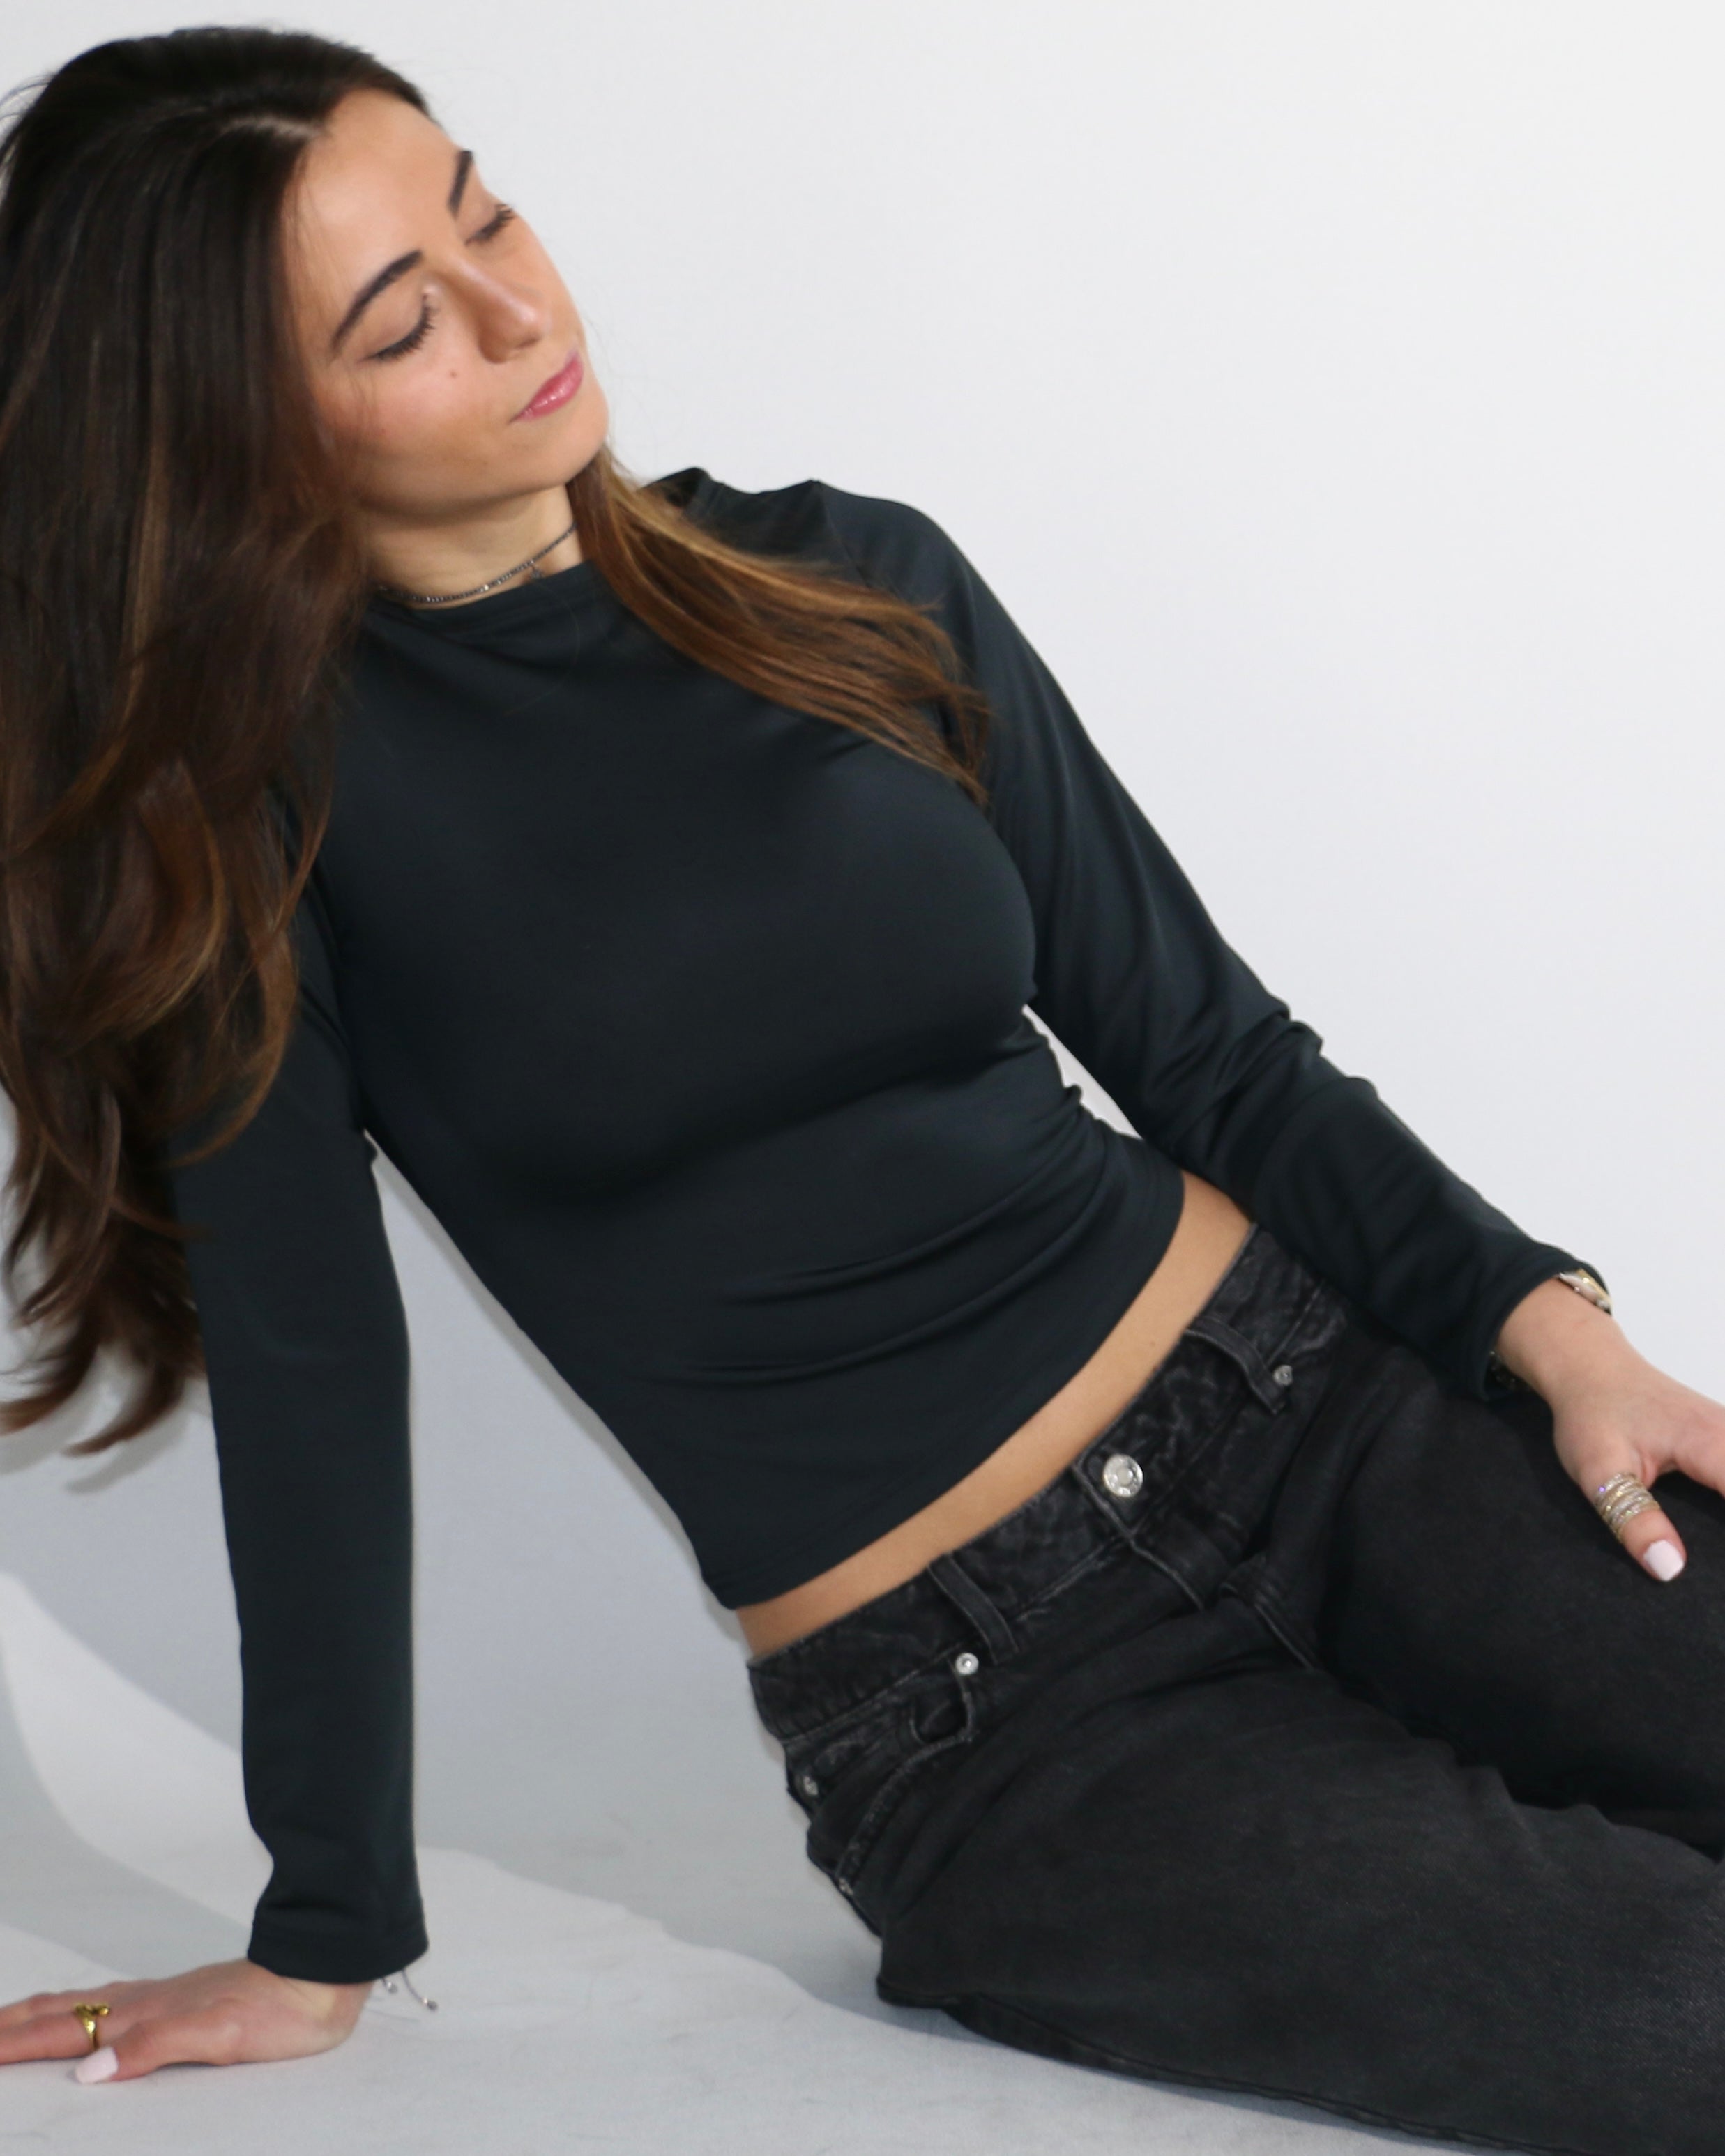 Long Sleeve Fitted Top Black